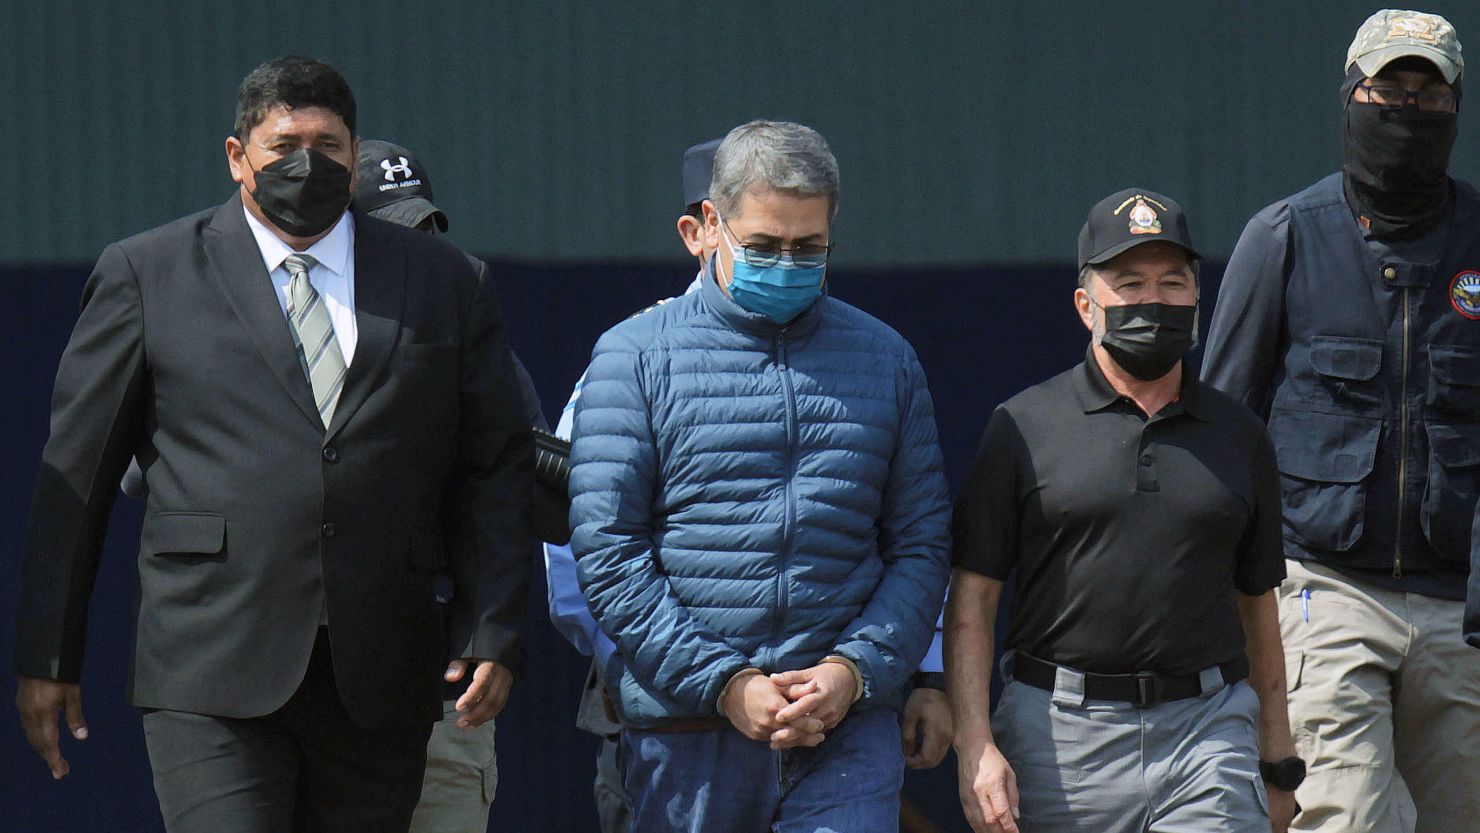 Honduras former President Juan Orlando Hernandez is escorted by authorities as he walks towards a plane of the U.S. Drug Enforcement Administration for his extradition to the United States.